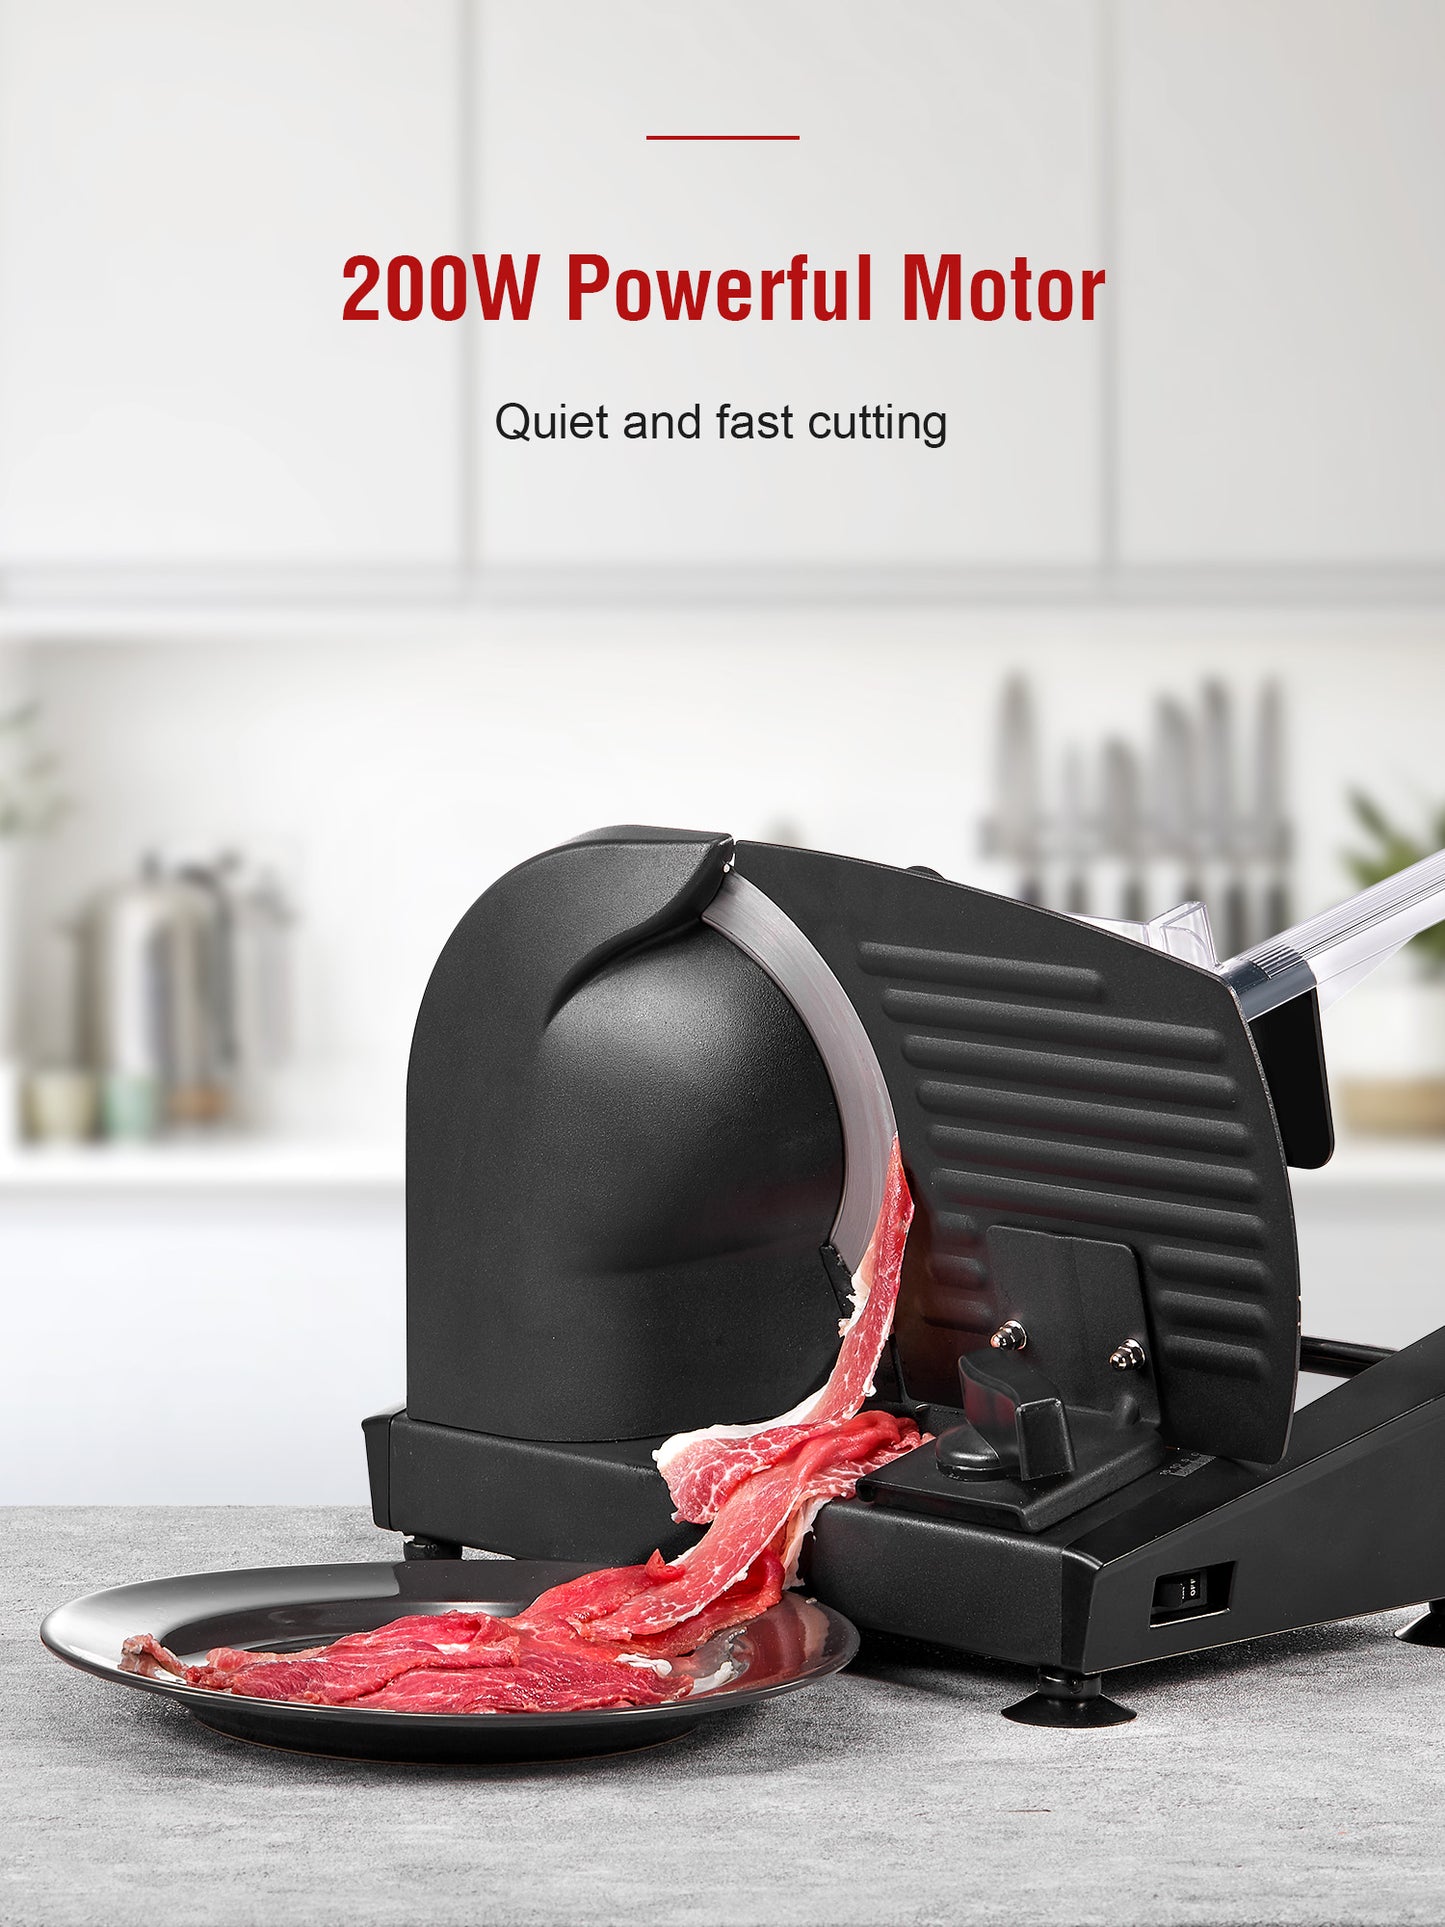 AICOK Meat Slicer, 200W Deli & Food Slicer with Two Removable 7.5’’ Stainless Steel Blade with Adjustable Thickness Knob (0-15mm) for Meat, Cheese, Bread, Black, Mode519